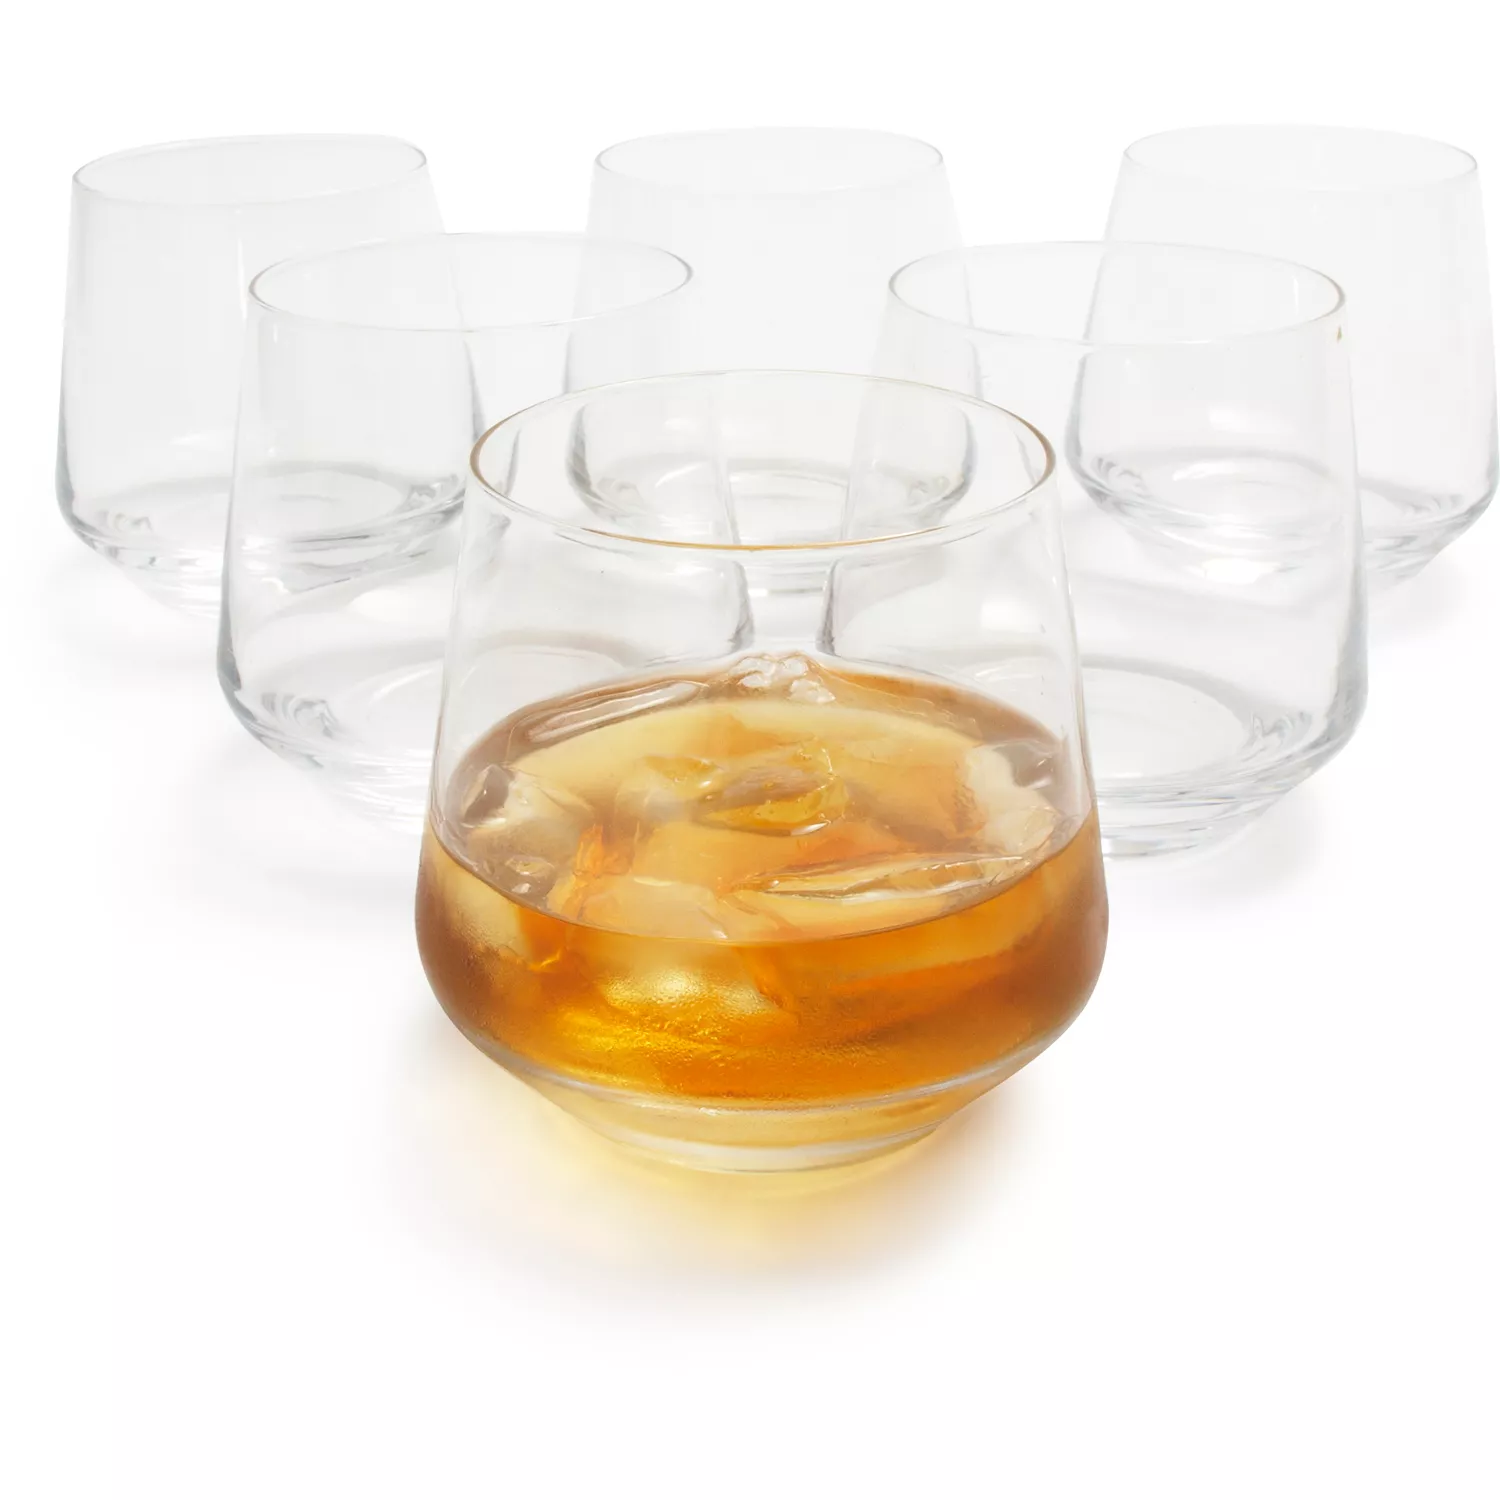 Schott Zwiesel Pure Crystal Whiskey Glasses (Set of 2)